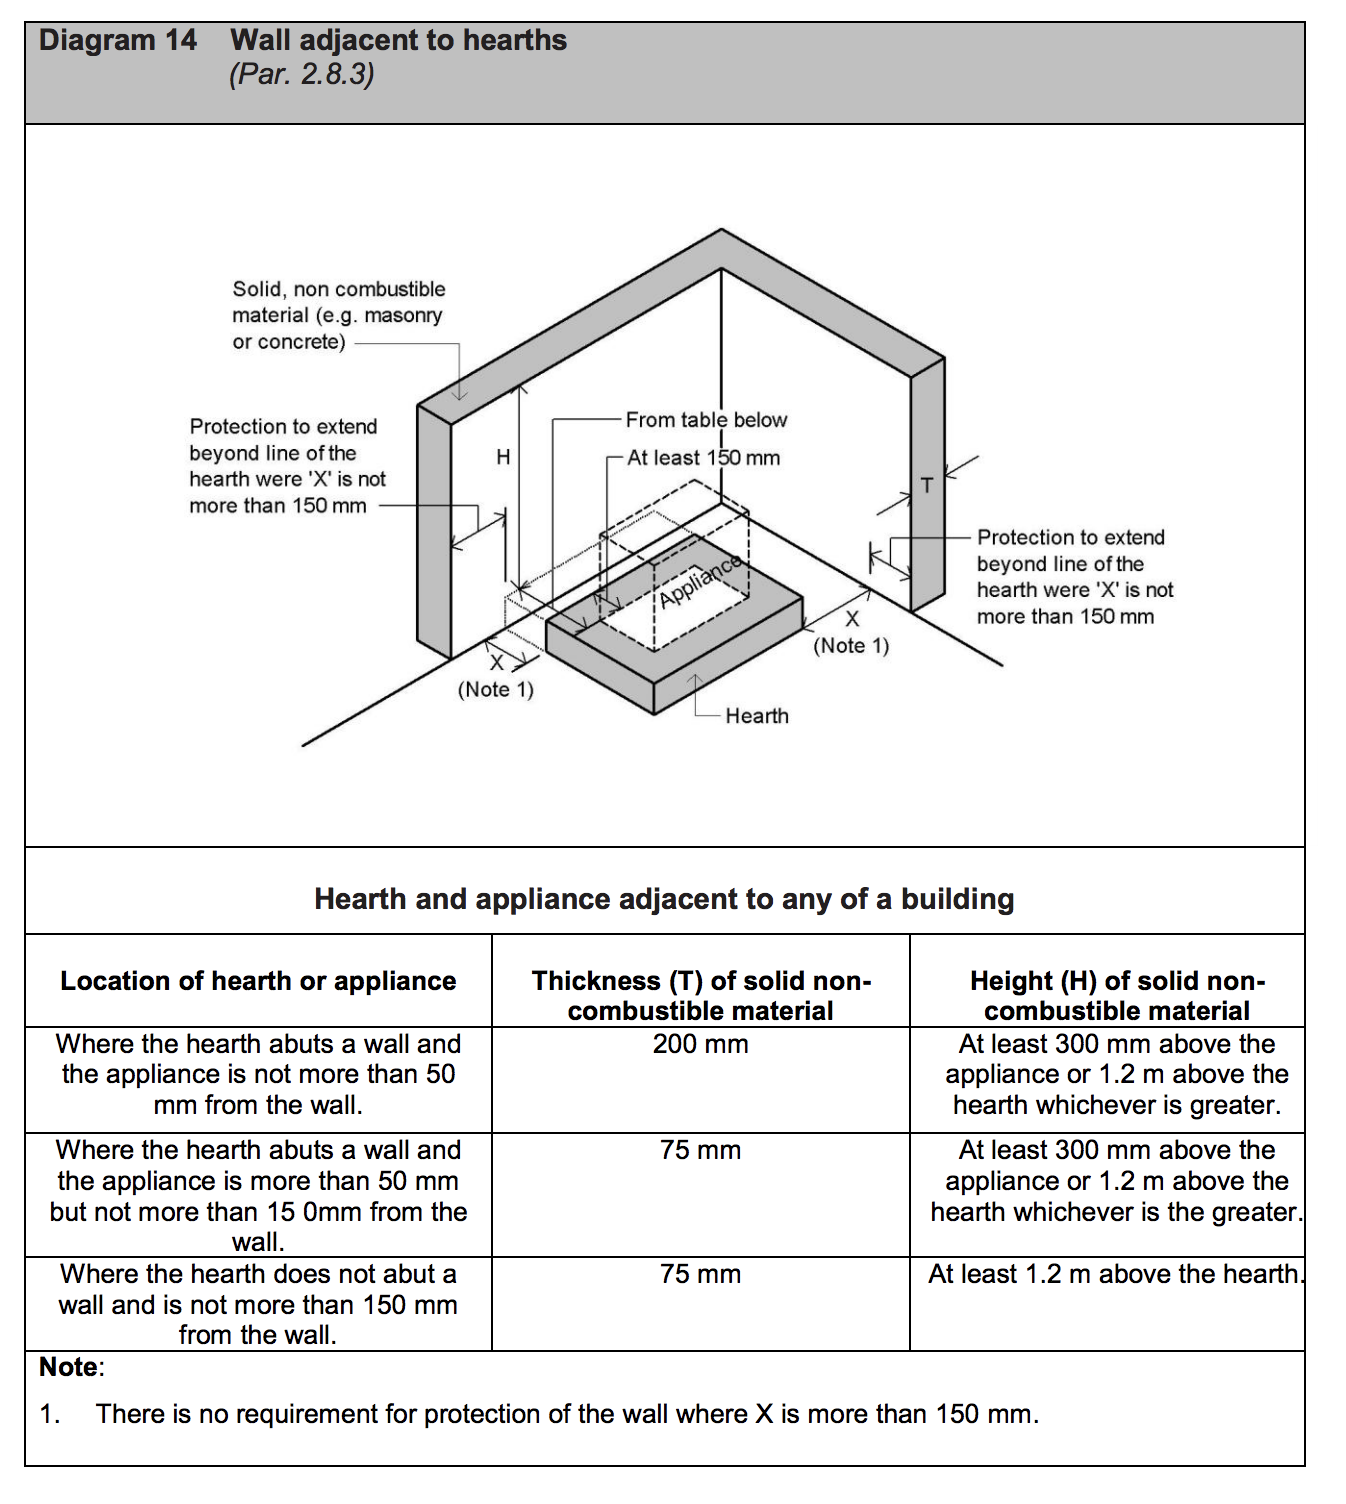 Diagram HJ14 - Wall adjacent to hearths - Extract from TGD J